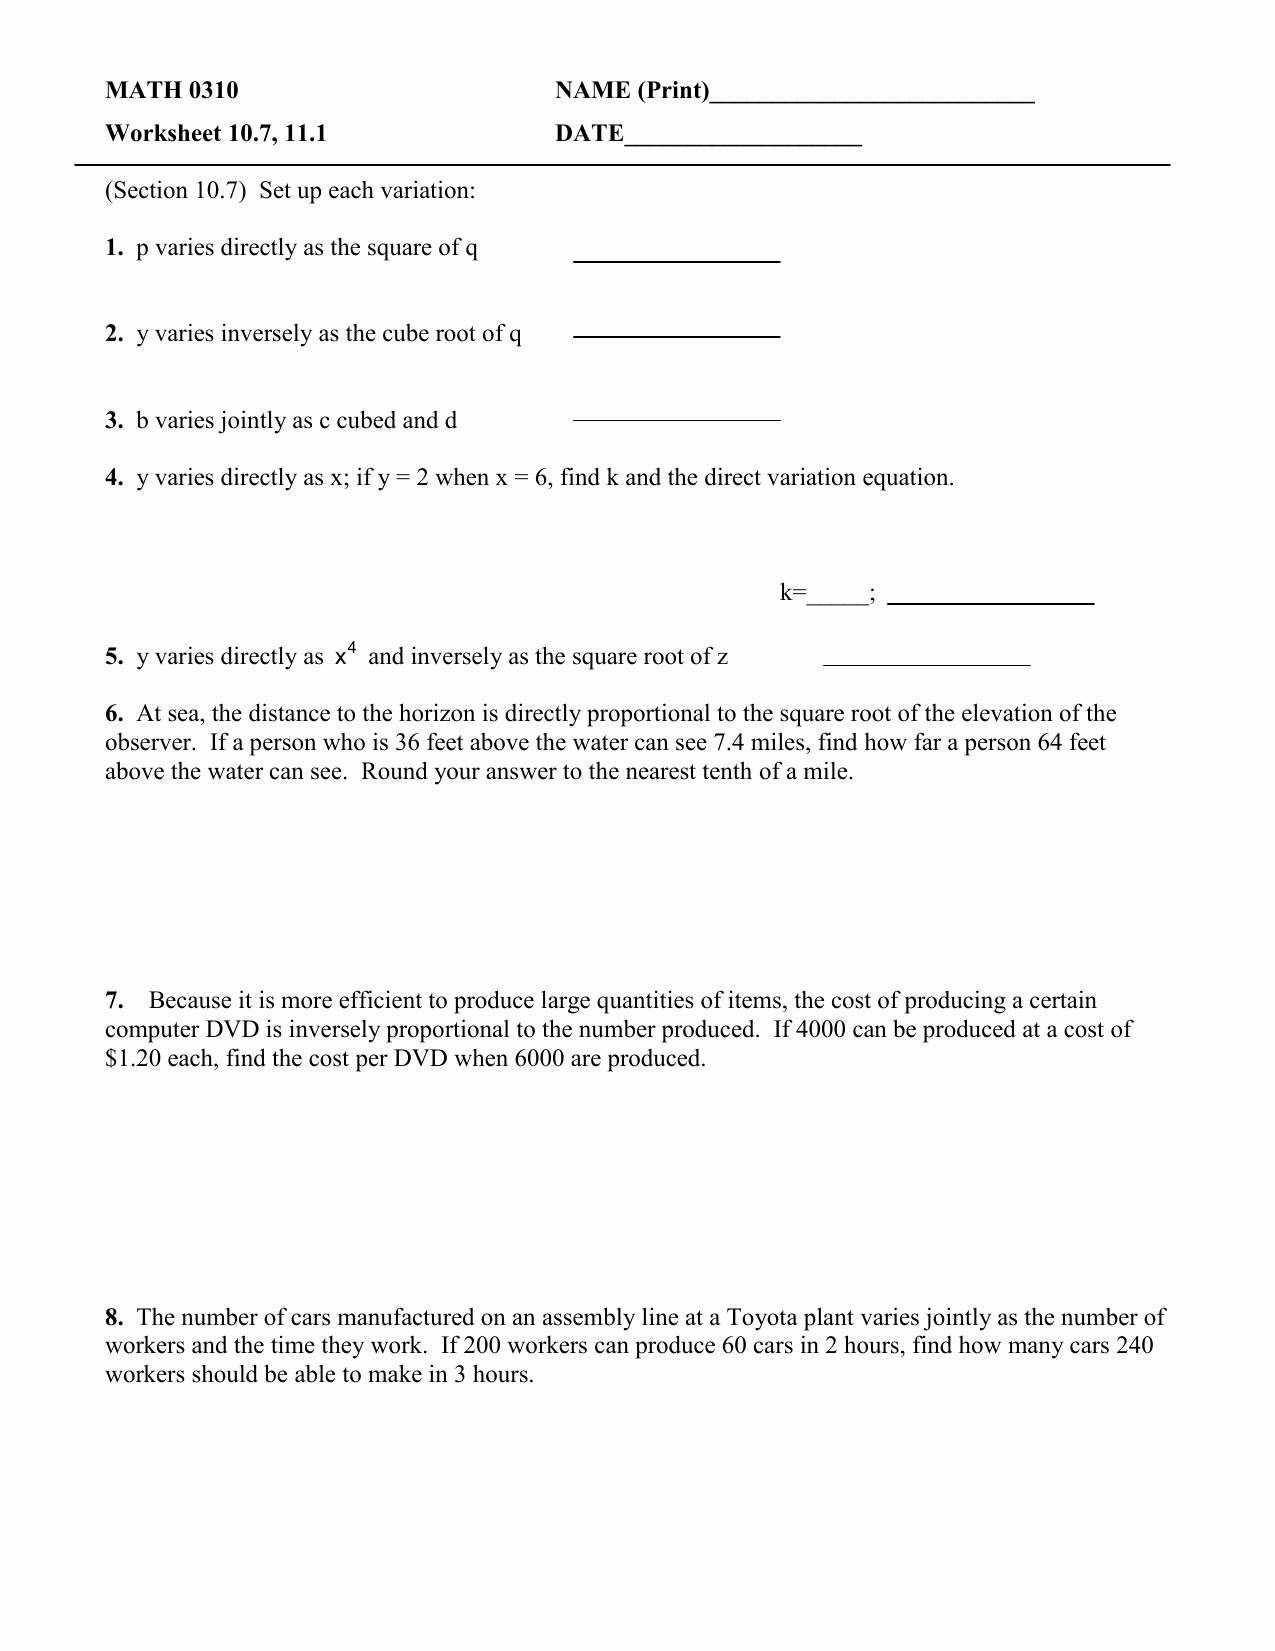 Direct and Inverse Variation Worksheet Inspirational Direct and Inverse Variation Worksheet with Answers